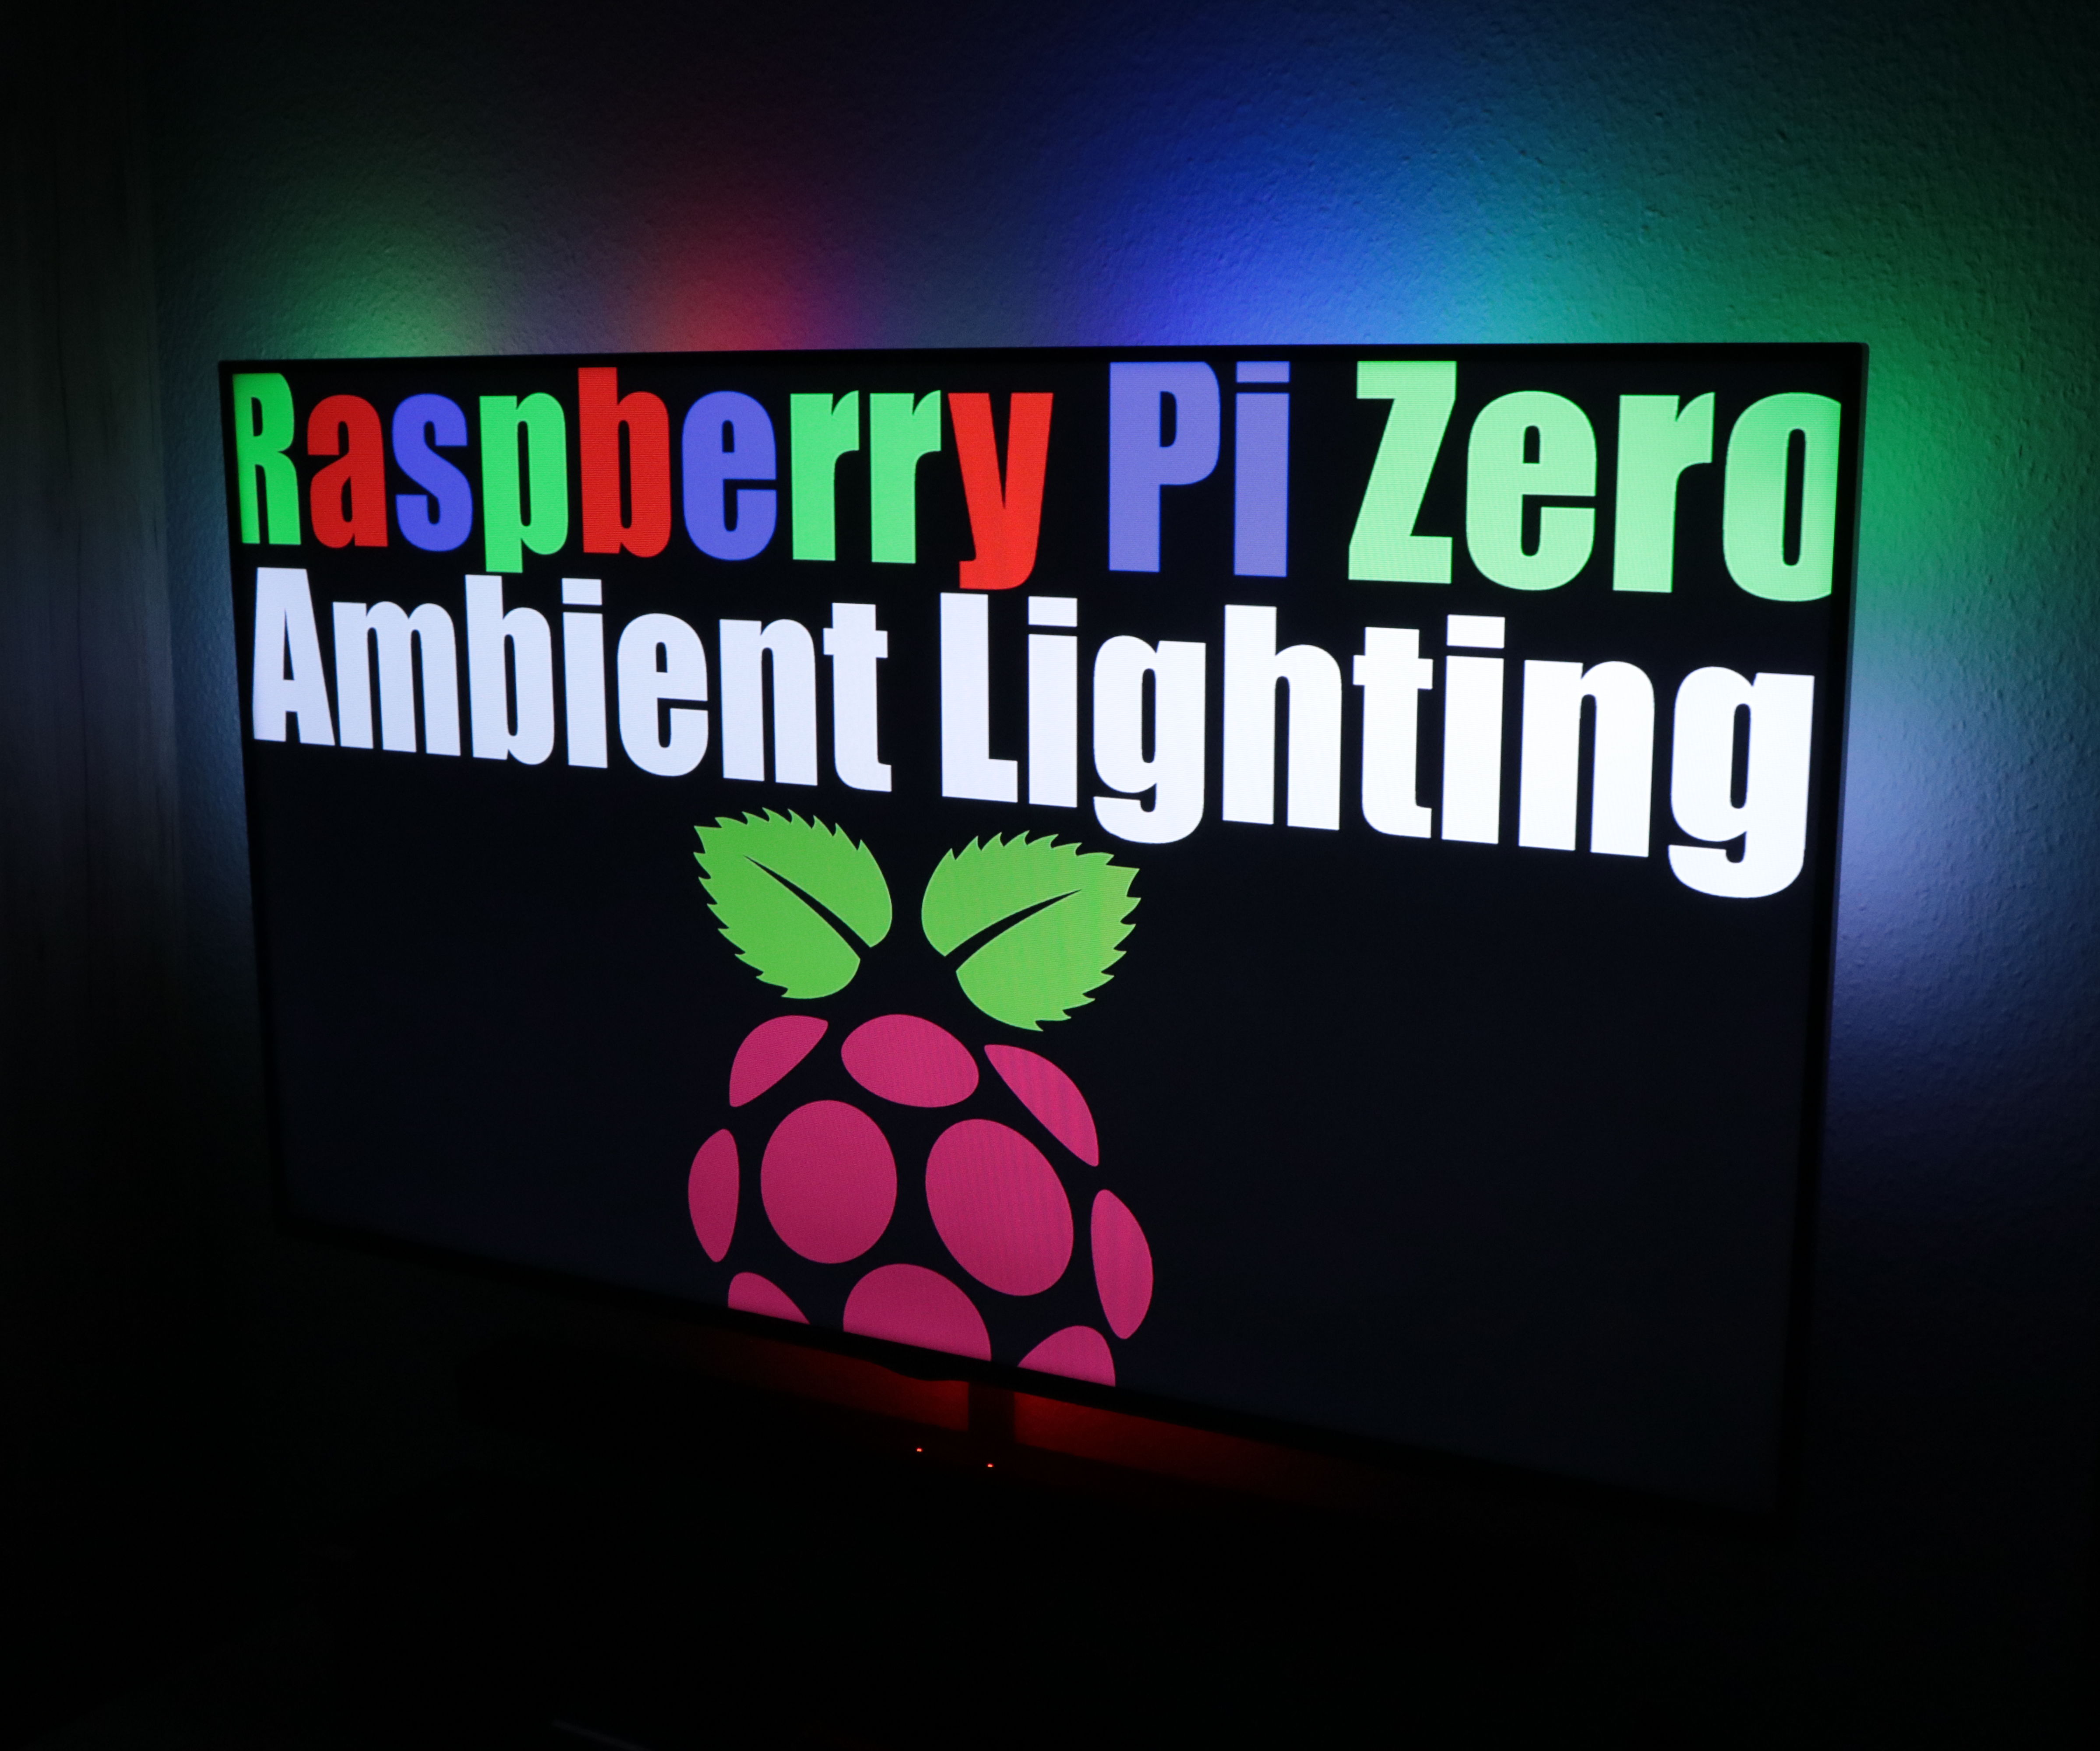 Make Your Own Ambient Lighting With the Raspberry Pi Zero